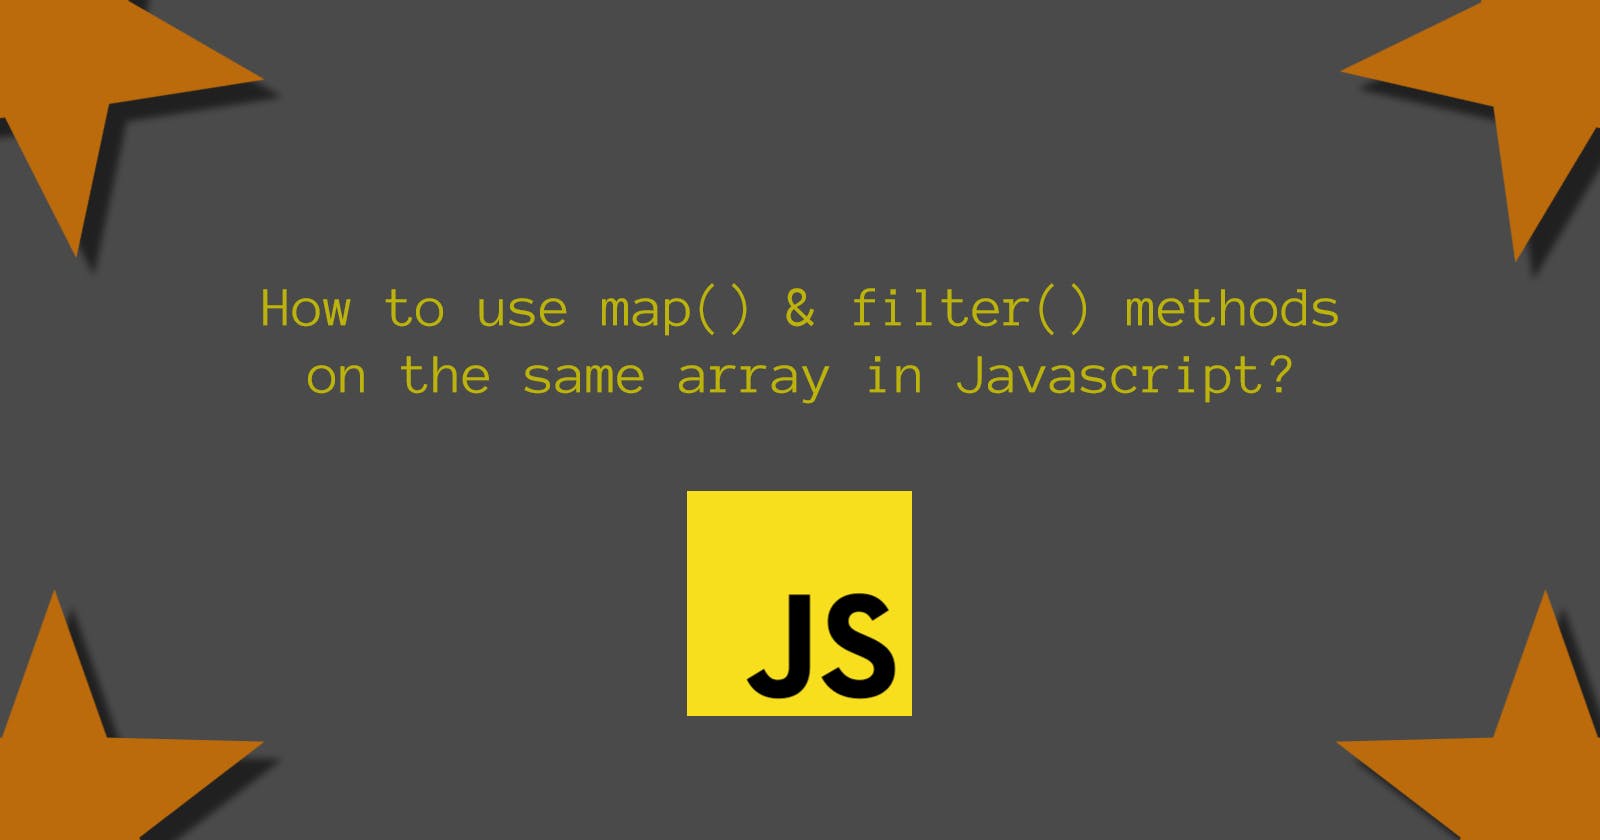 How to use map() and filter() methods on the same array in JavaScript?